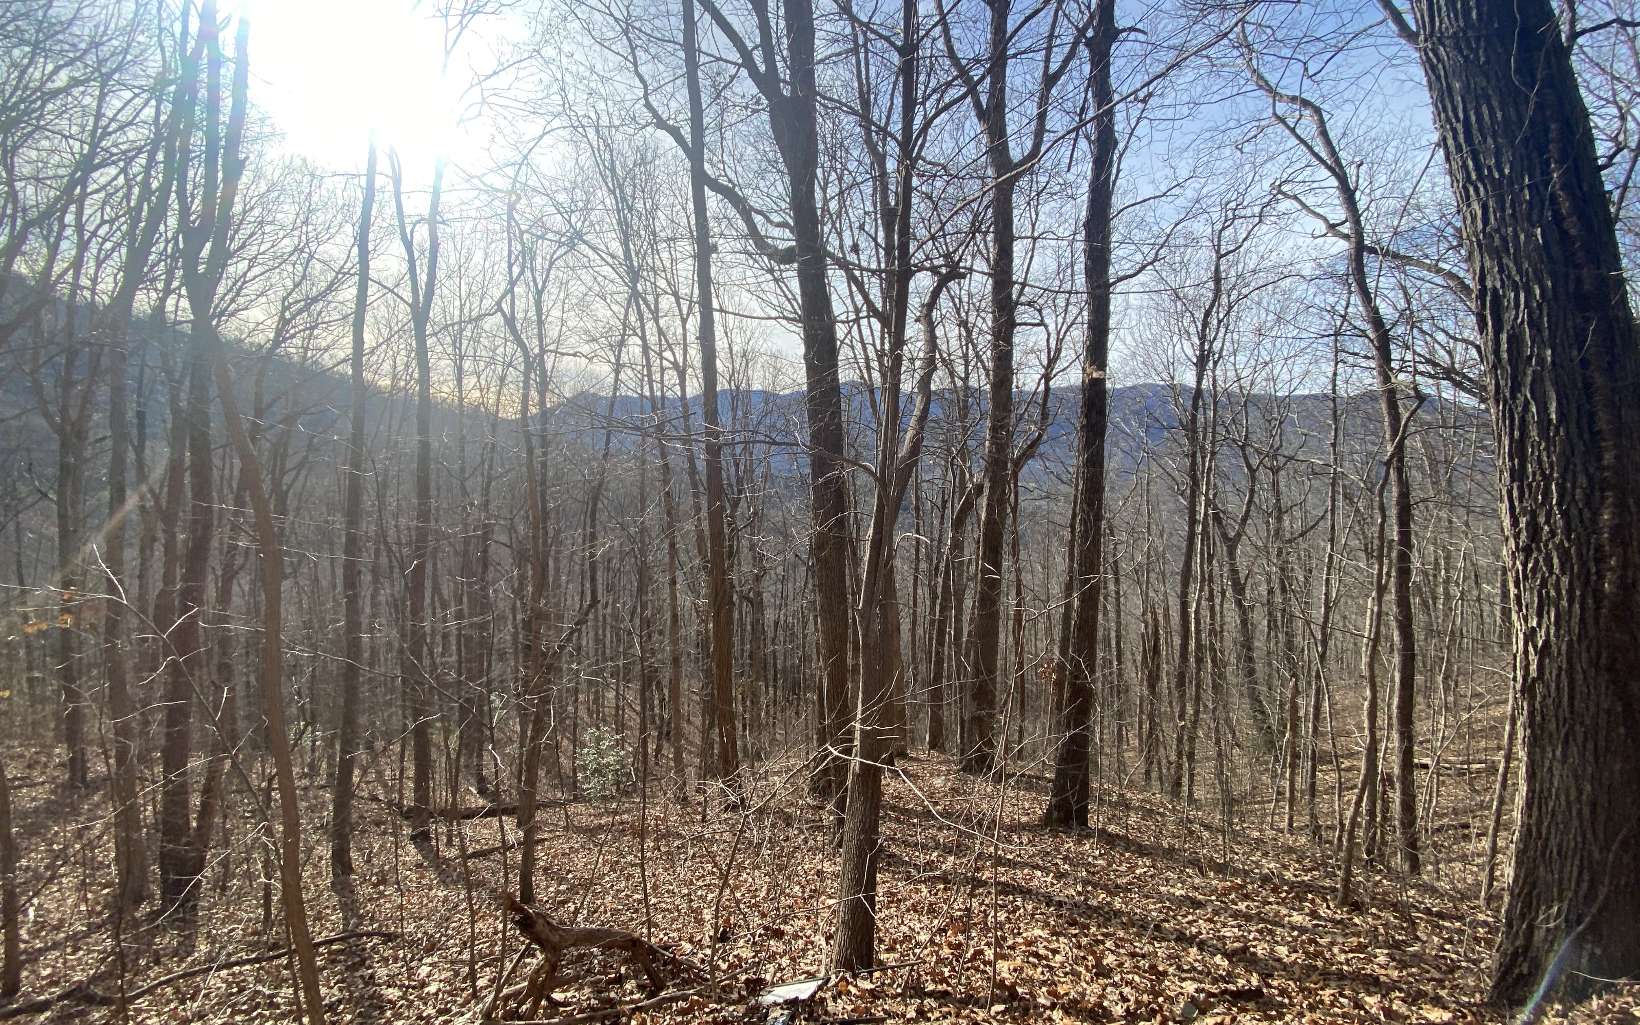 Big Mountain Views from this UNRESTRICTED 5.27 acres. Enjoy panoramic views facing Brasstown Bald. Private location not too far from town. Electric available. Soil test completed.